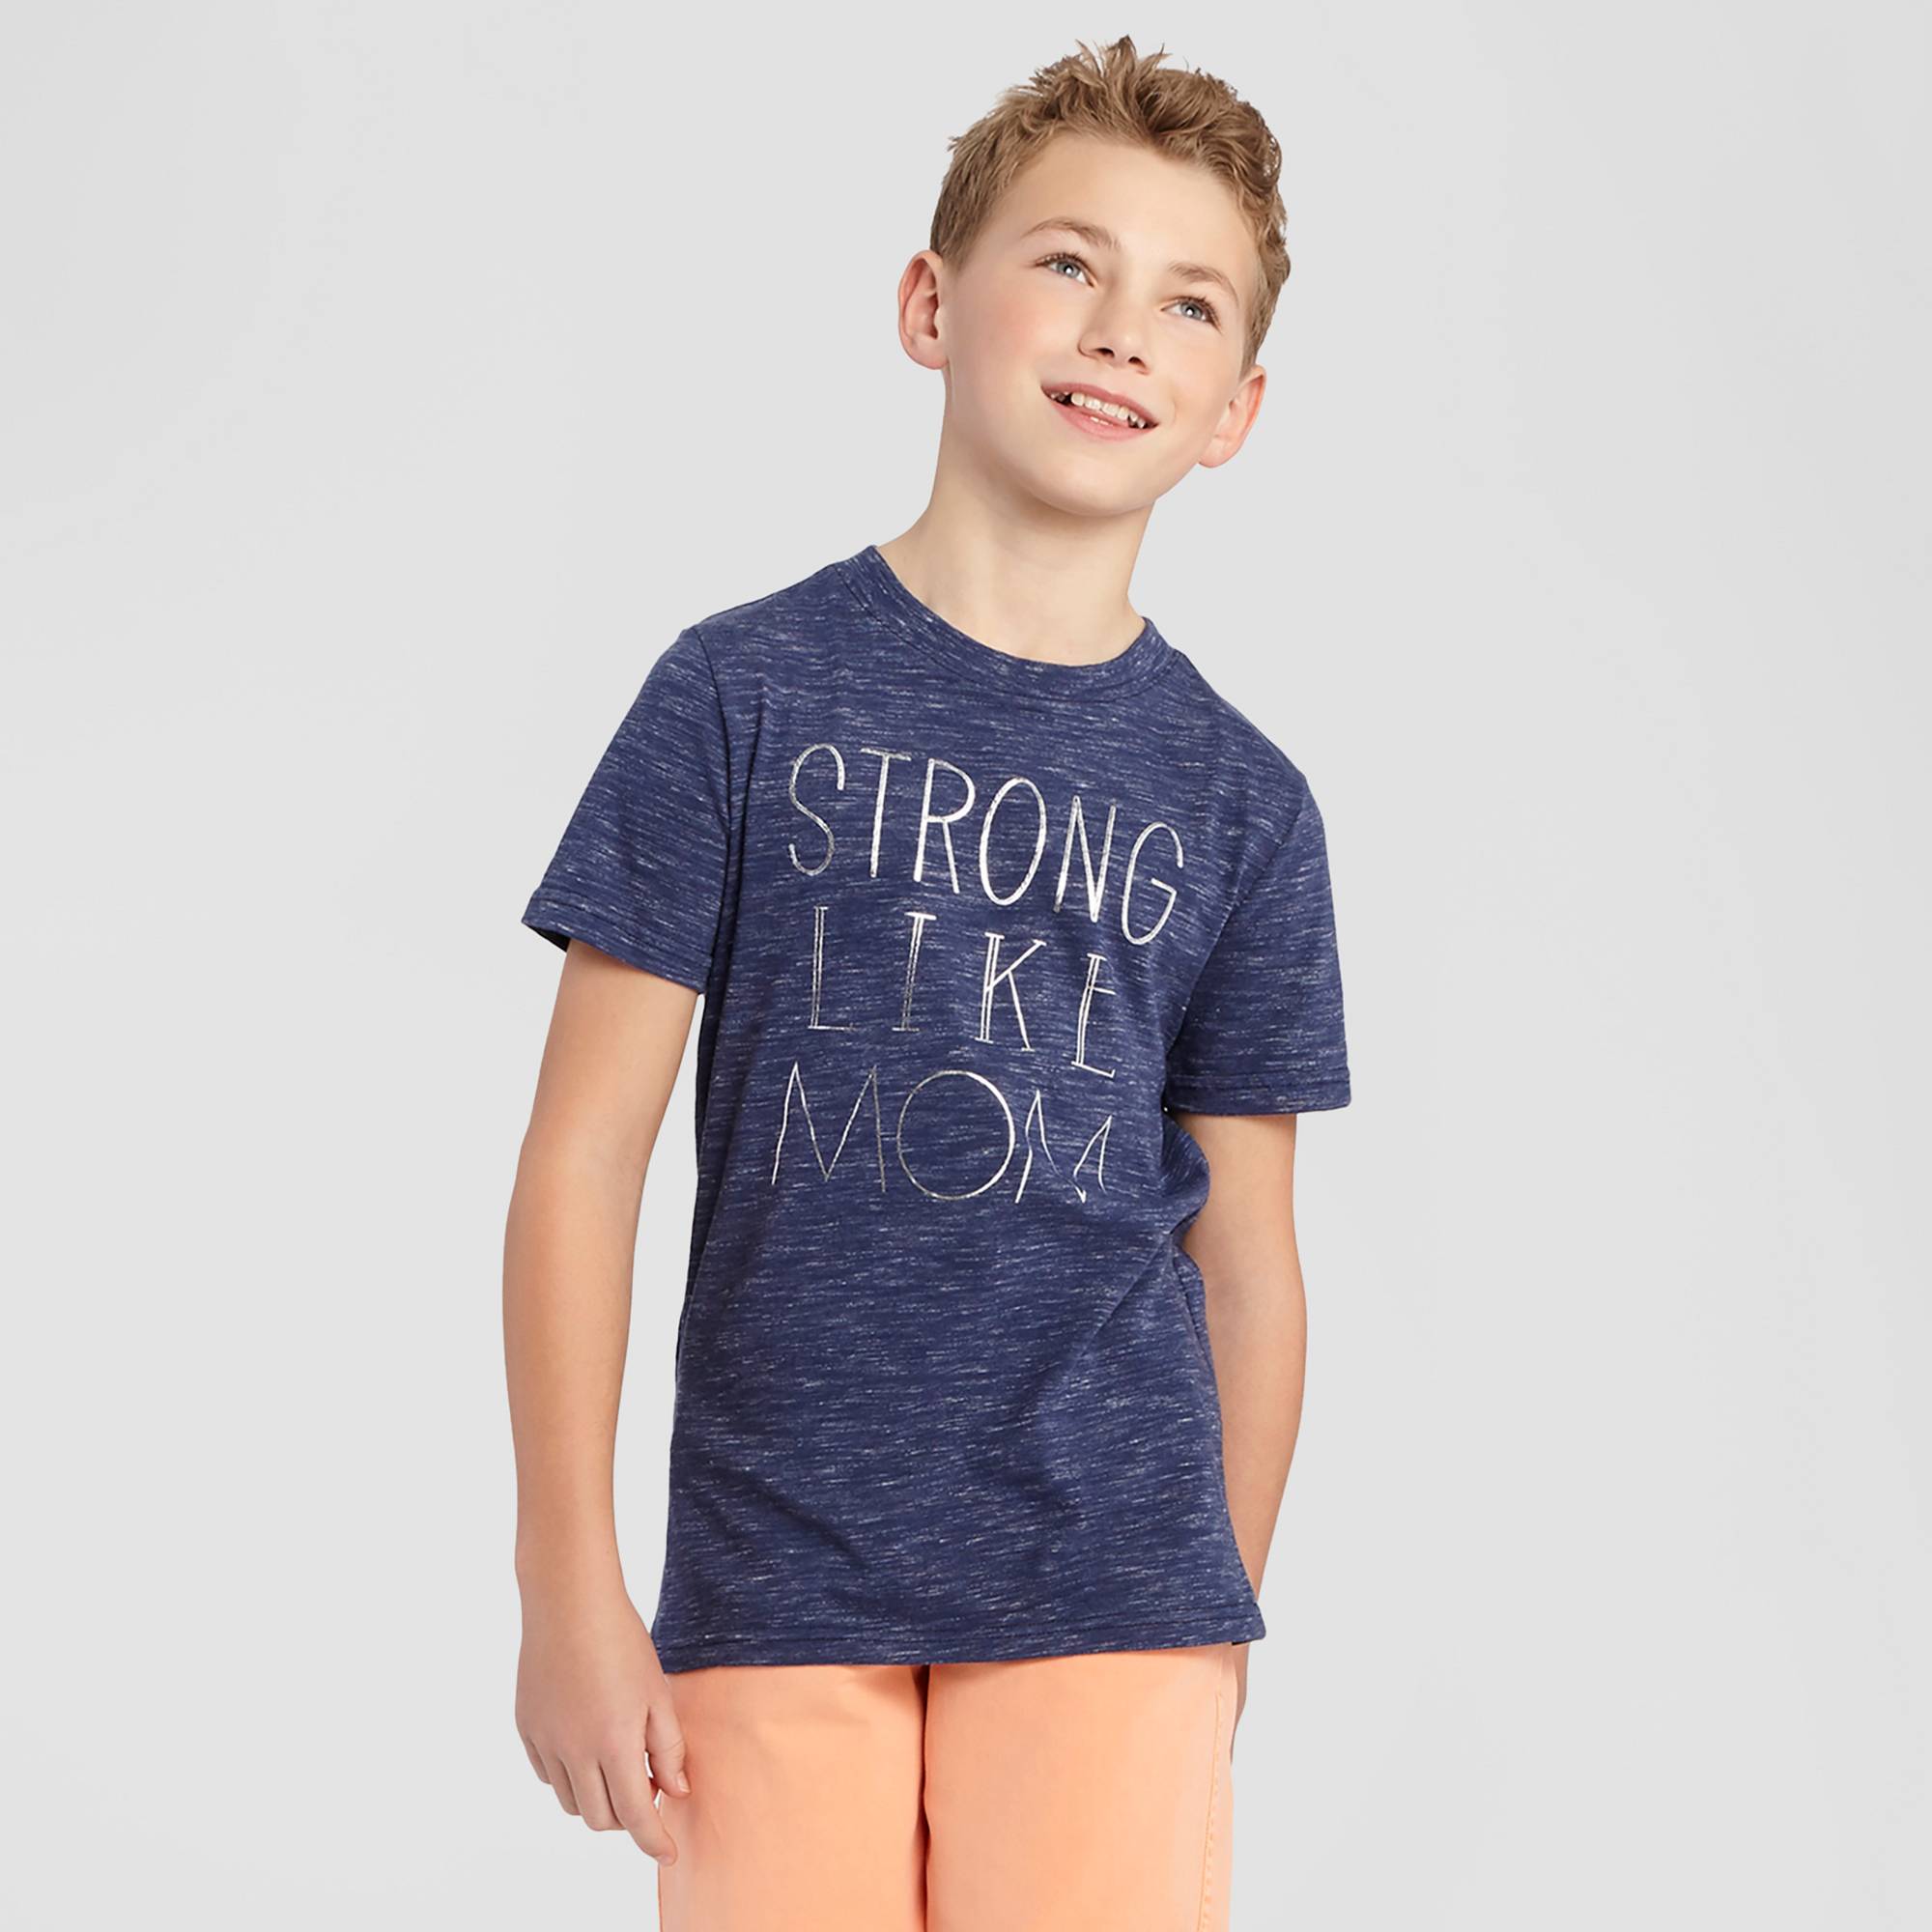 Target Debuts A Strong Like Mom Shirt For Boys Here S How